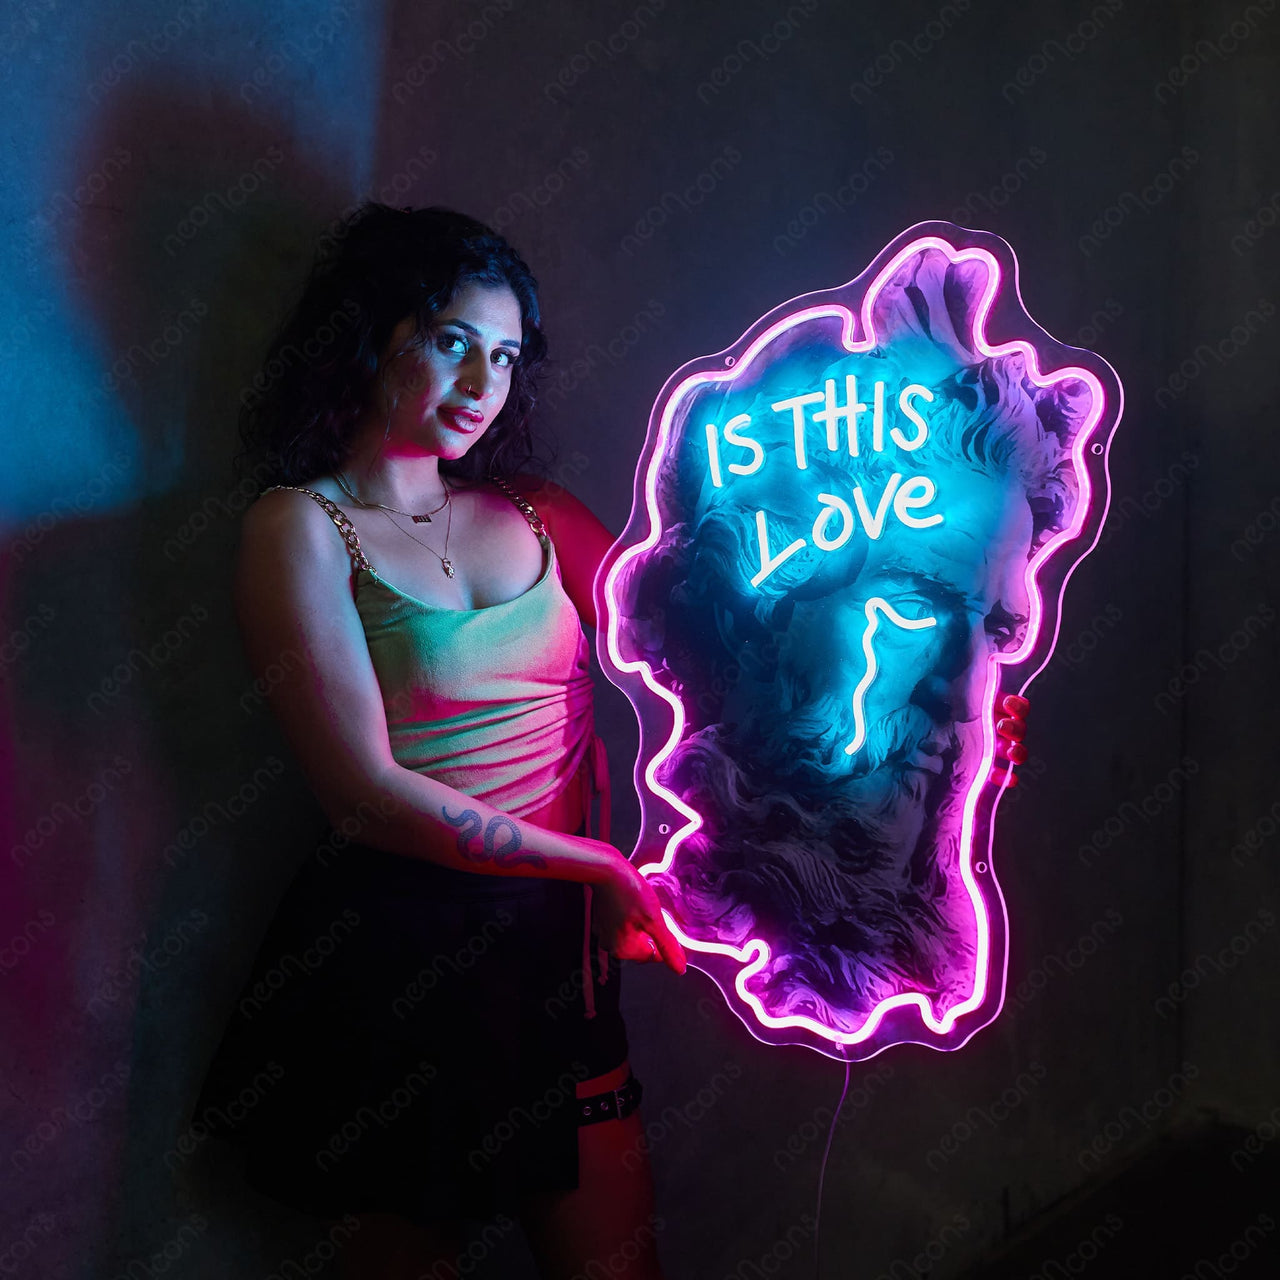 "Is This Love" LED Neon x Acrylic Artwork by Neon Icons